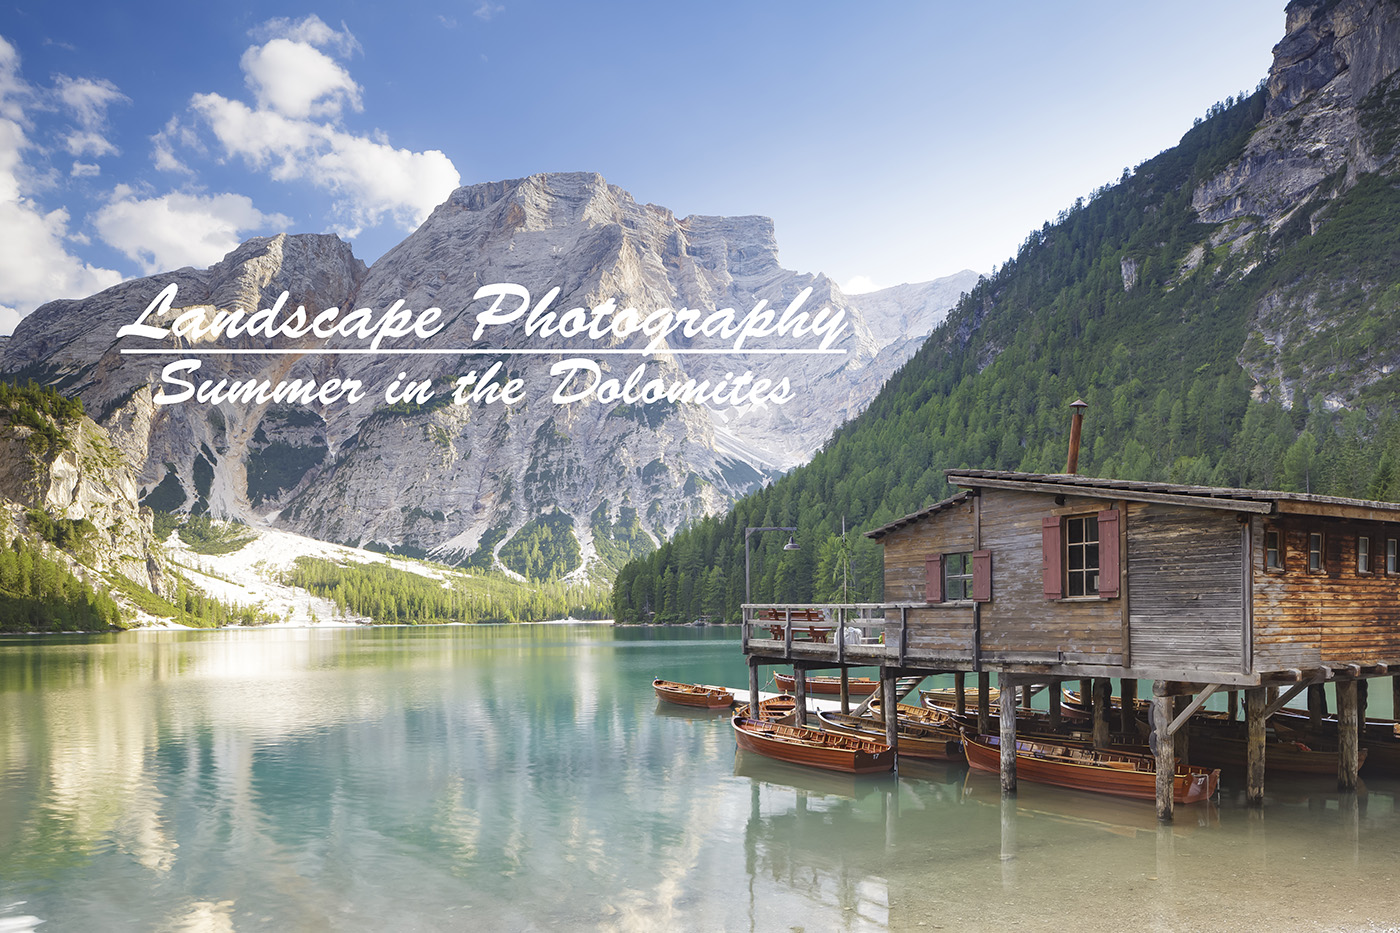 Landscape Photography Summer in the Dolomites